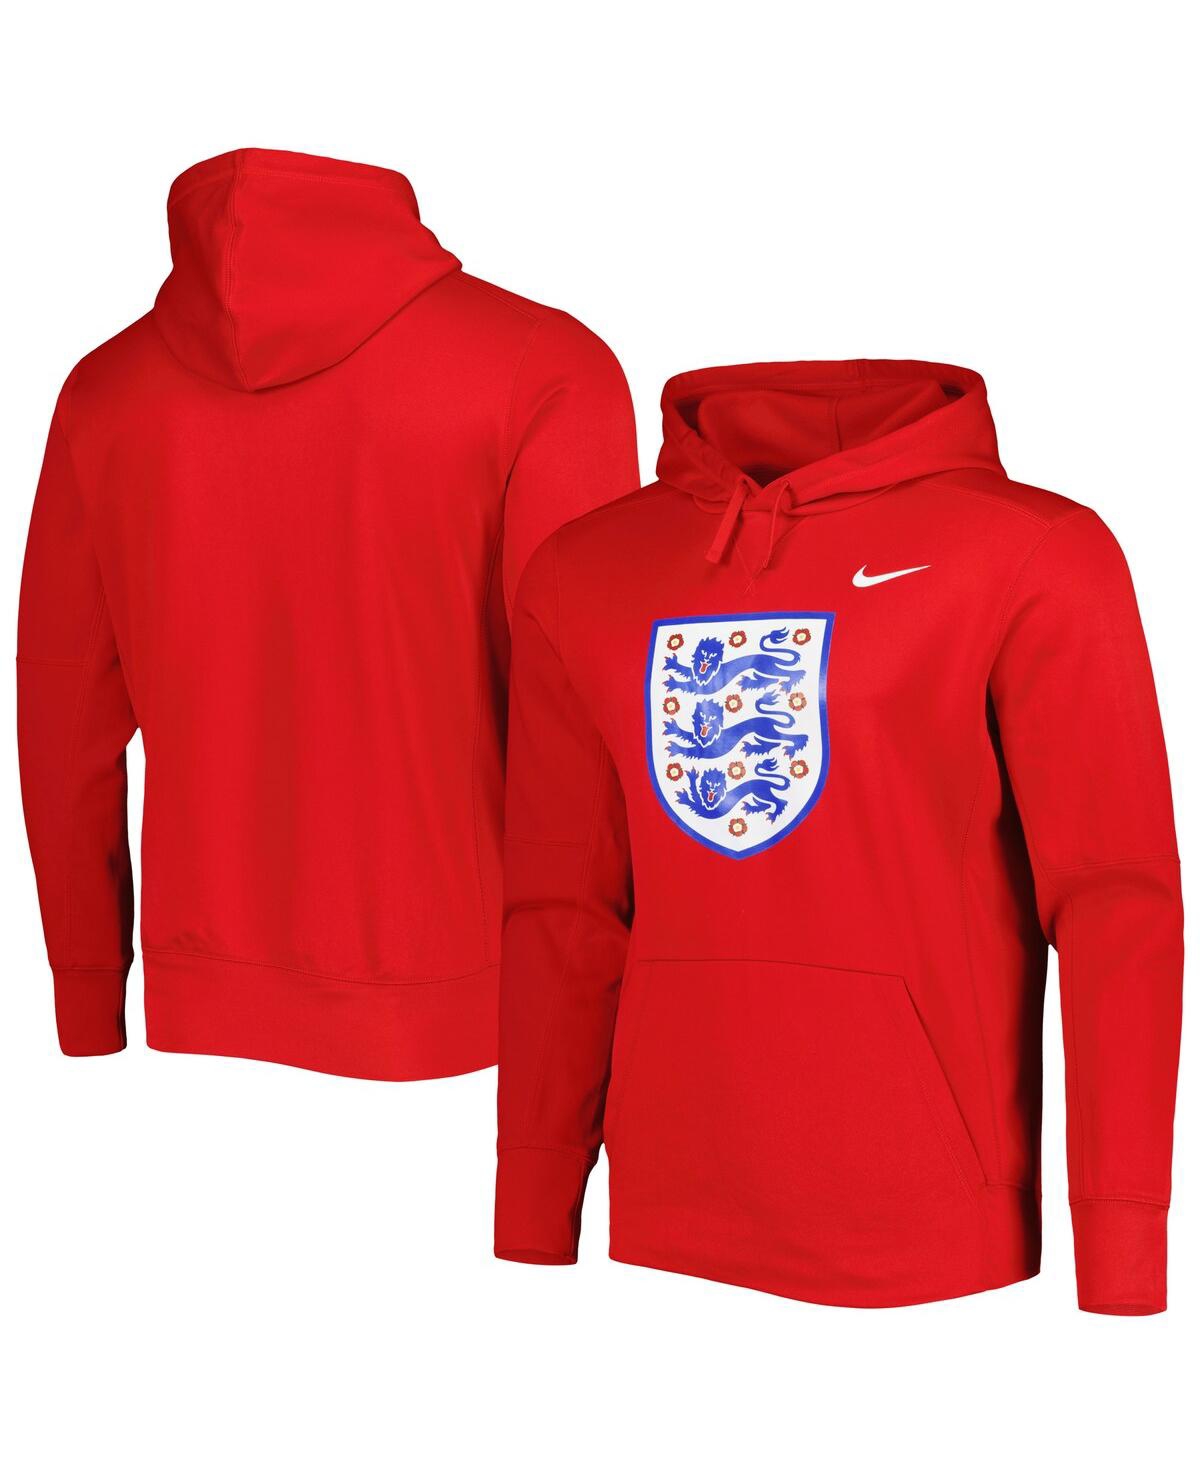 NIKE MEN'S NIKE RED ENGLAND NATIONAL TEAM THERMA PERFORMANCE PULLOVER HOODIE